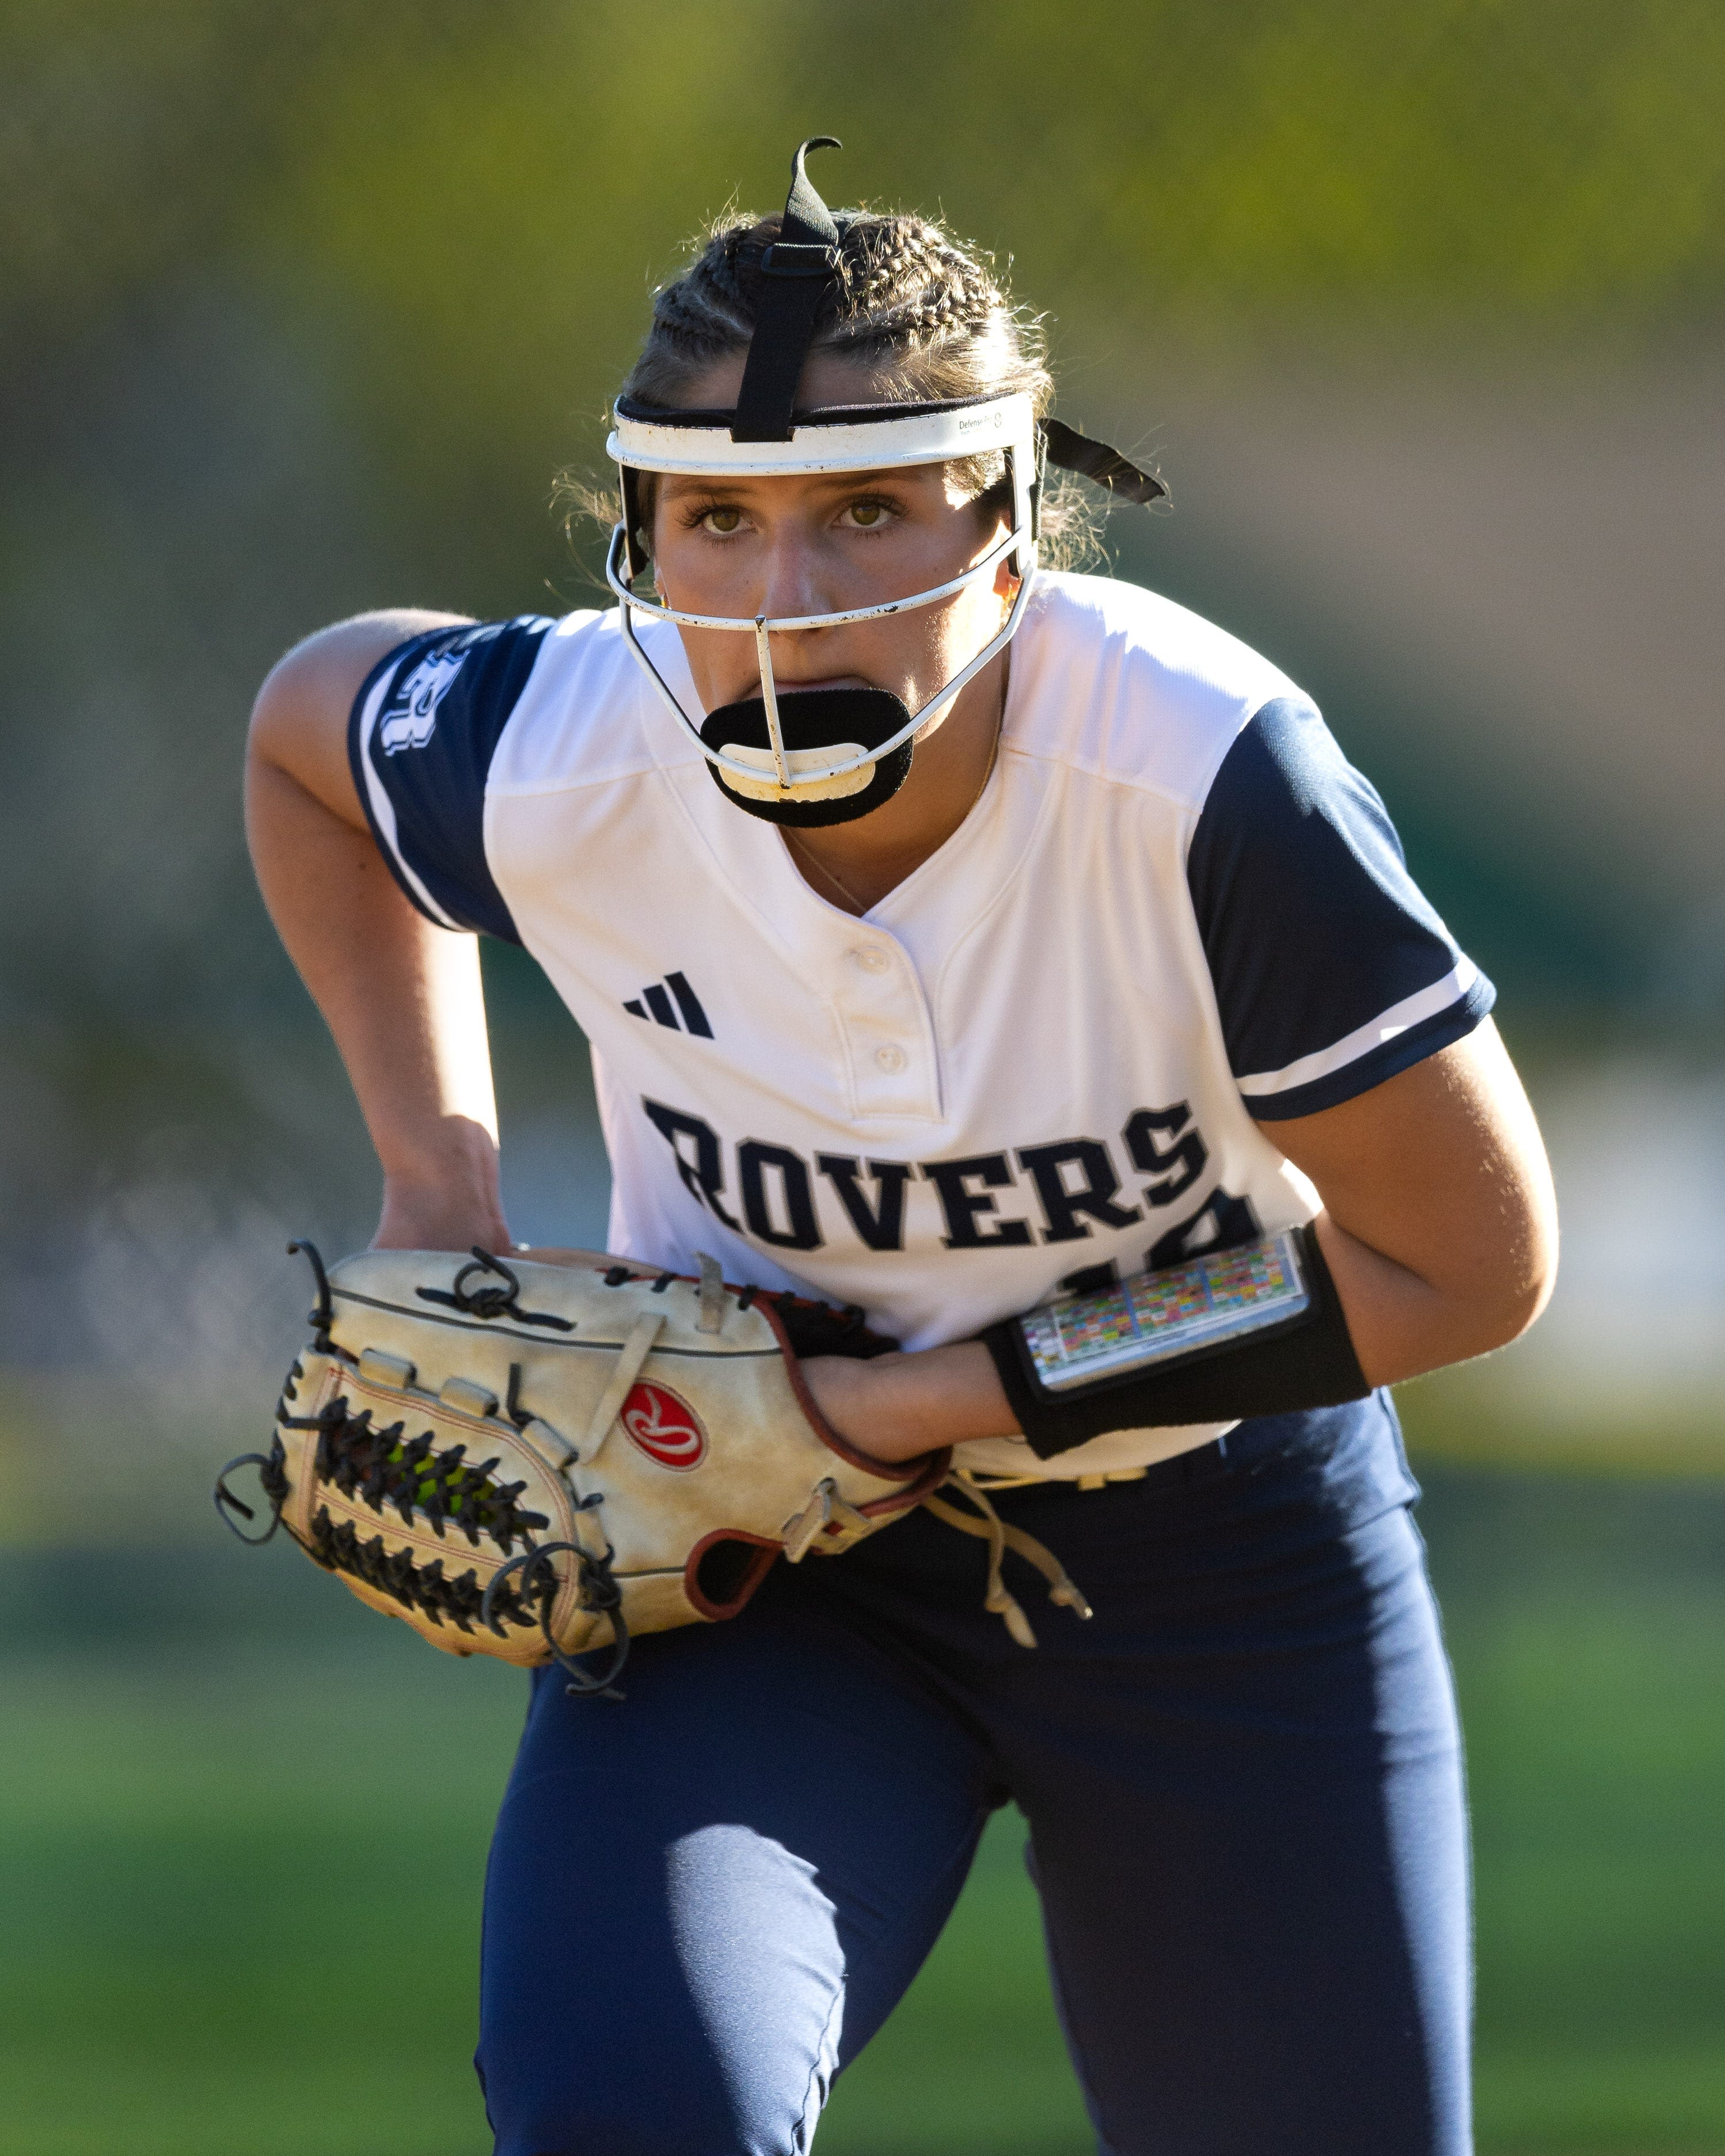 Athlete of the Week Shelbie Krieger of Rootstown relishes 'having control over the game'